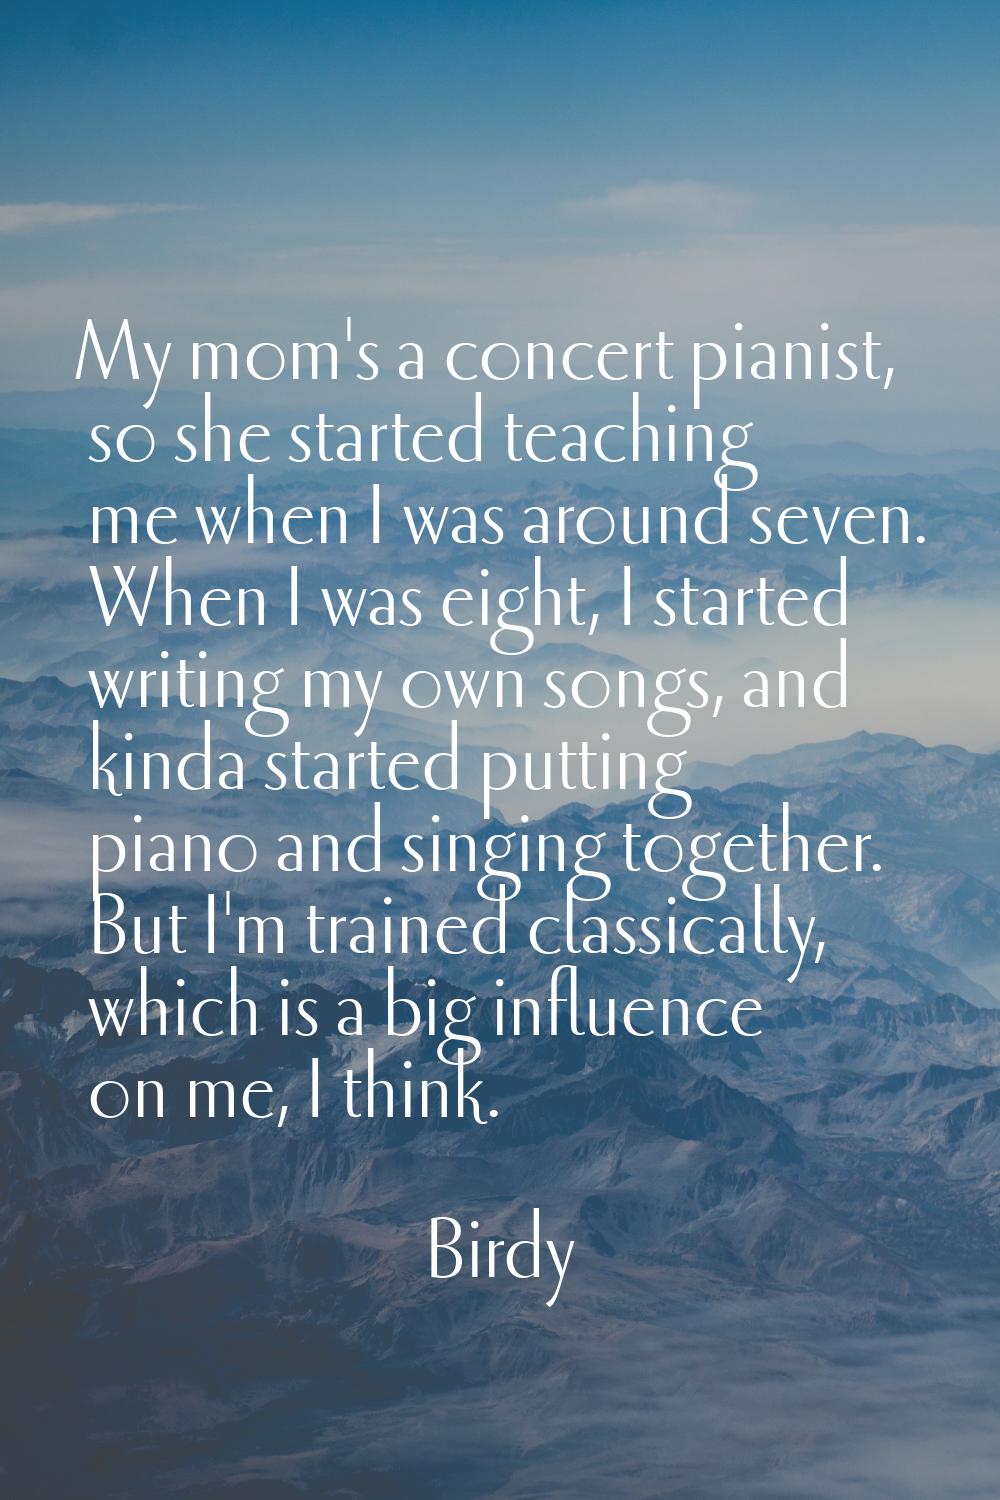 My mom's a concert pianist, so she started teaching me when I was around seven. When I was eight, I